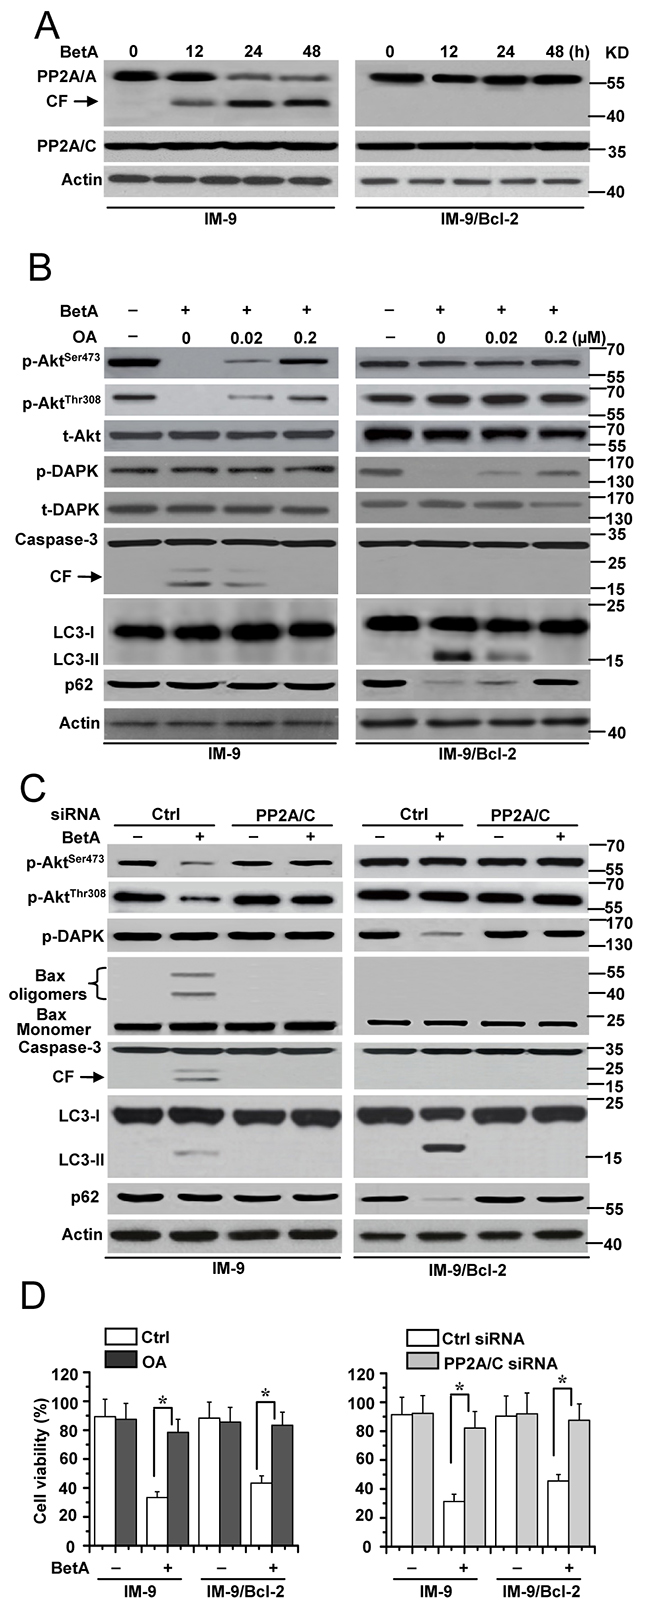 PP2A is required for BetA-induced apoptosis or autophagic cell death.